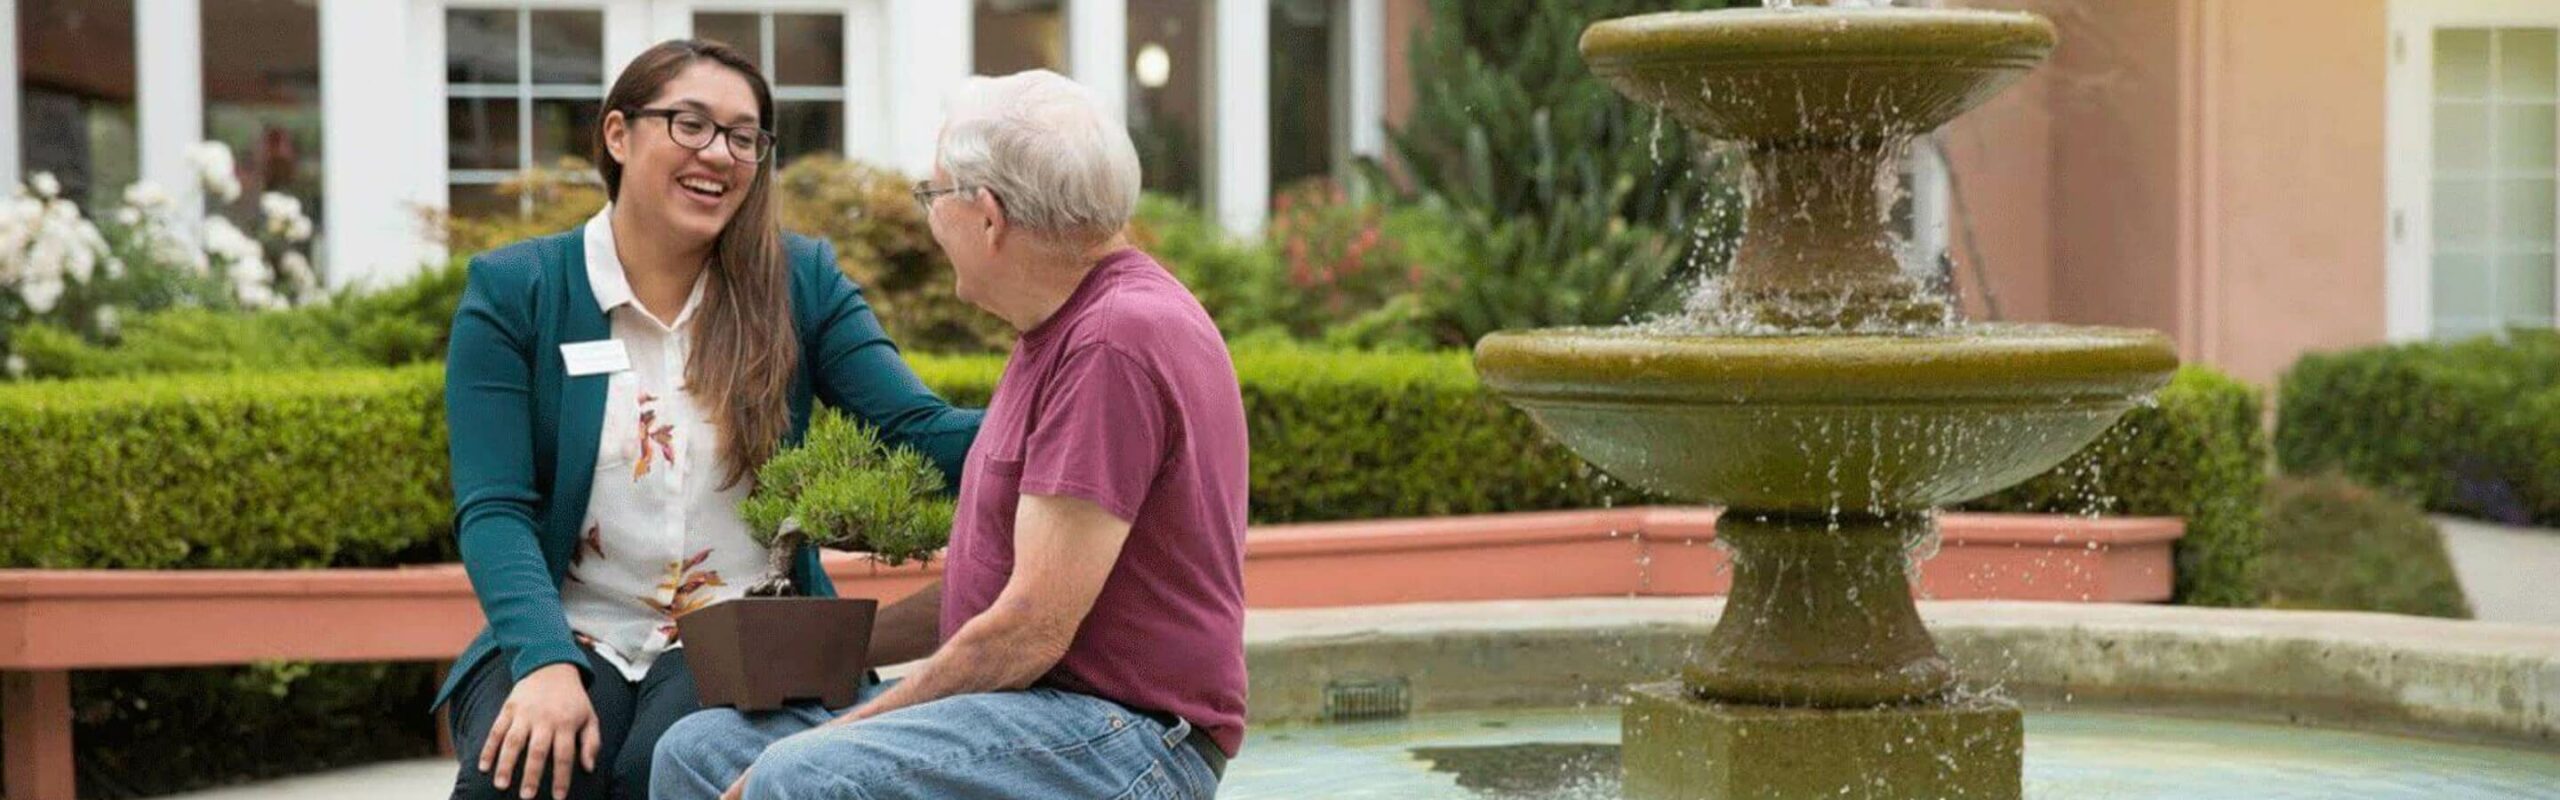 An elderly man and a Carlton team member share a laugh while seated on a bench by a fountain, representing the caring and friendly team interactions at Carlton Senior Living.